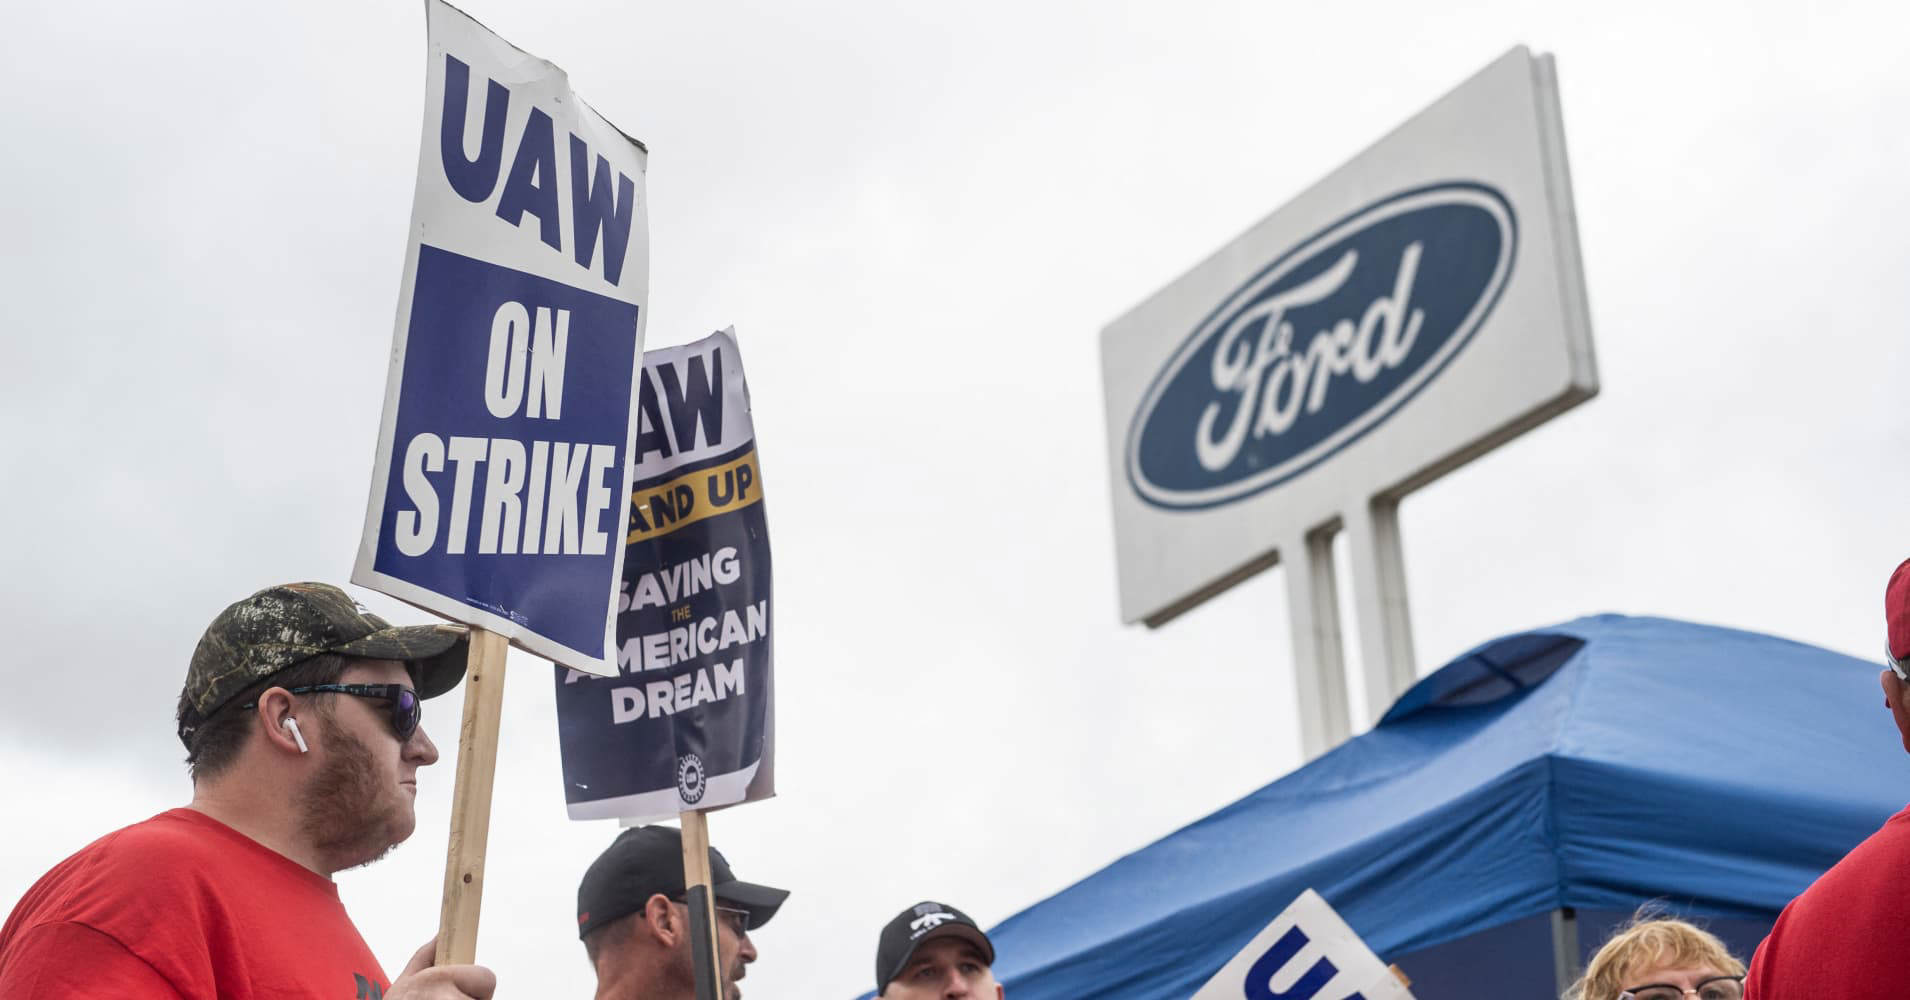 UAW deal with Ford includes 8.1 billion in investments, 5,000